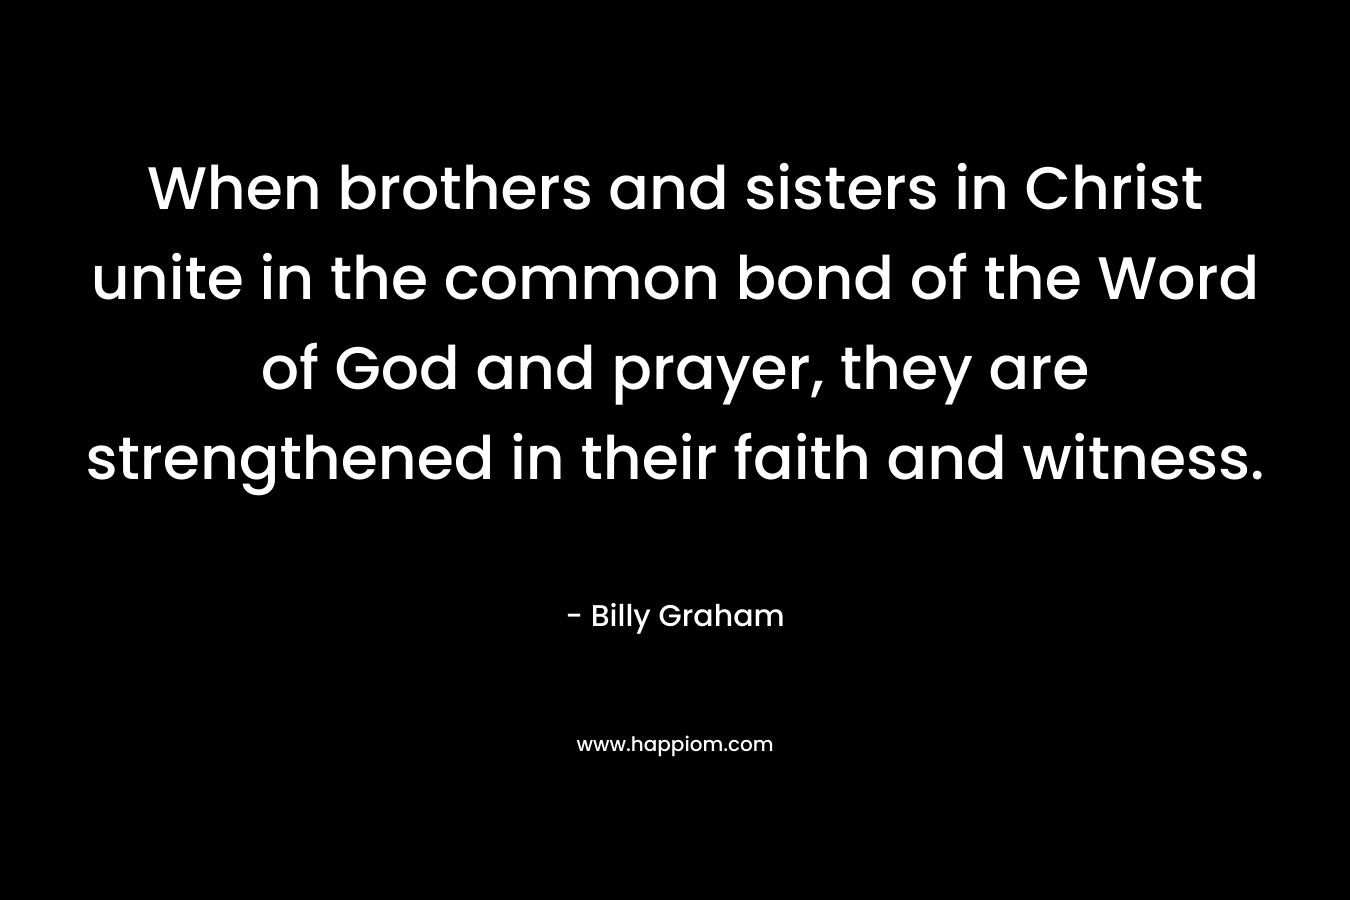 When brothers and sisters in Christ unite in the common bond of the Word of God and prayer, they are strengthened in their faith and witness.